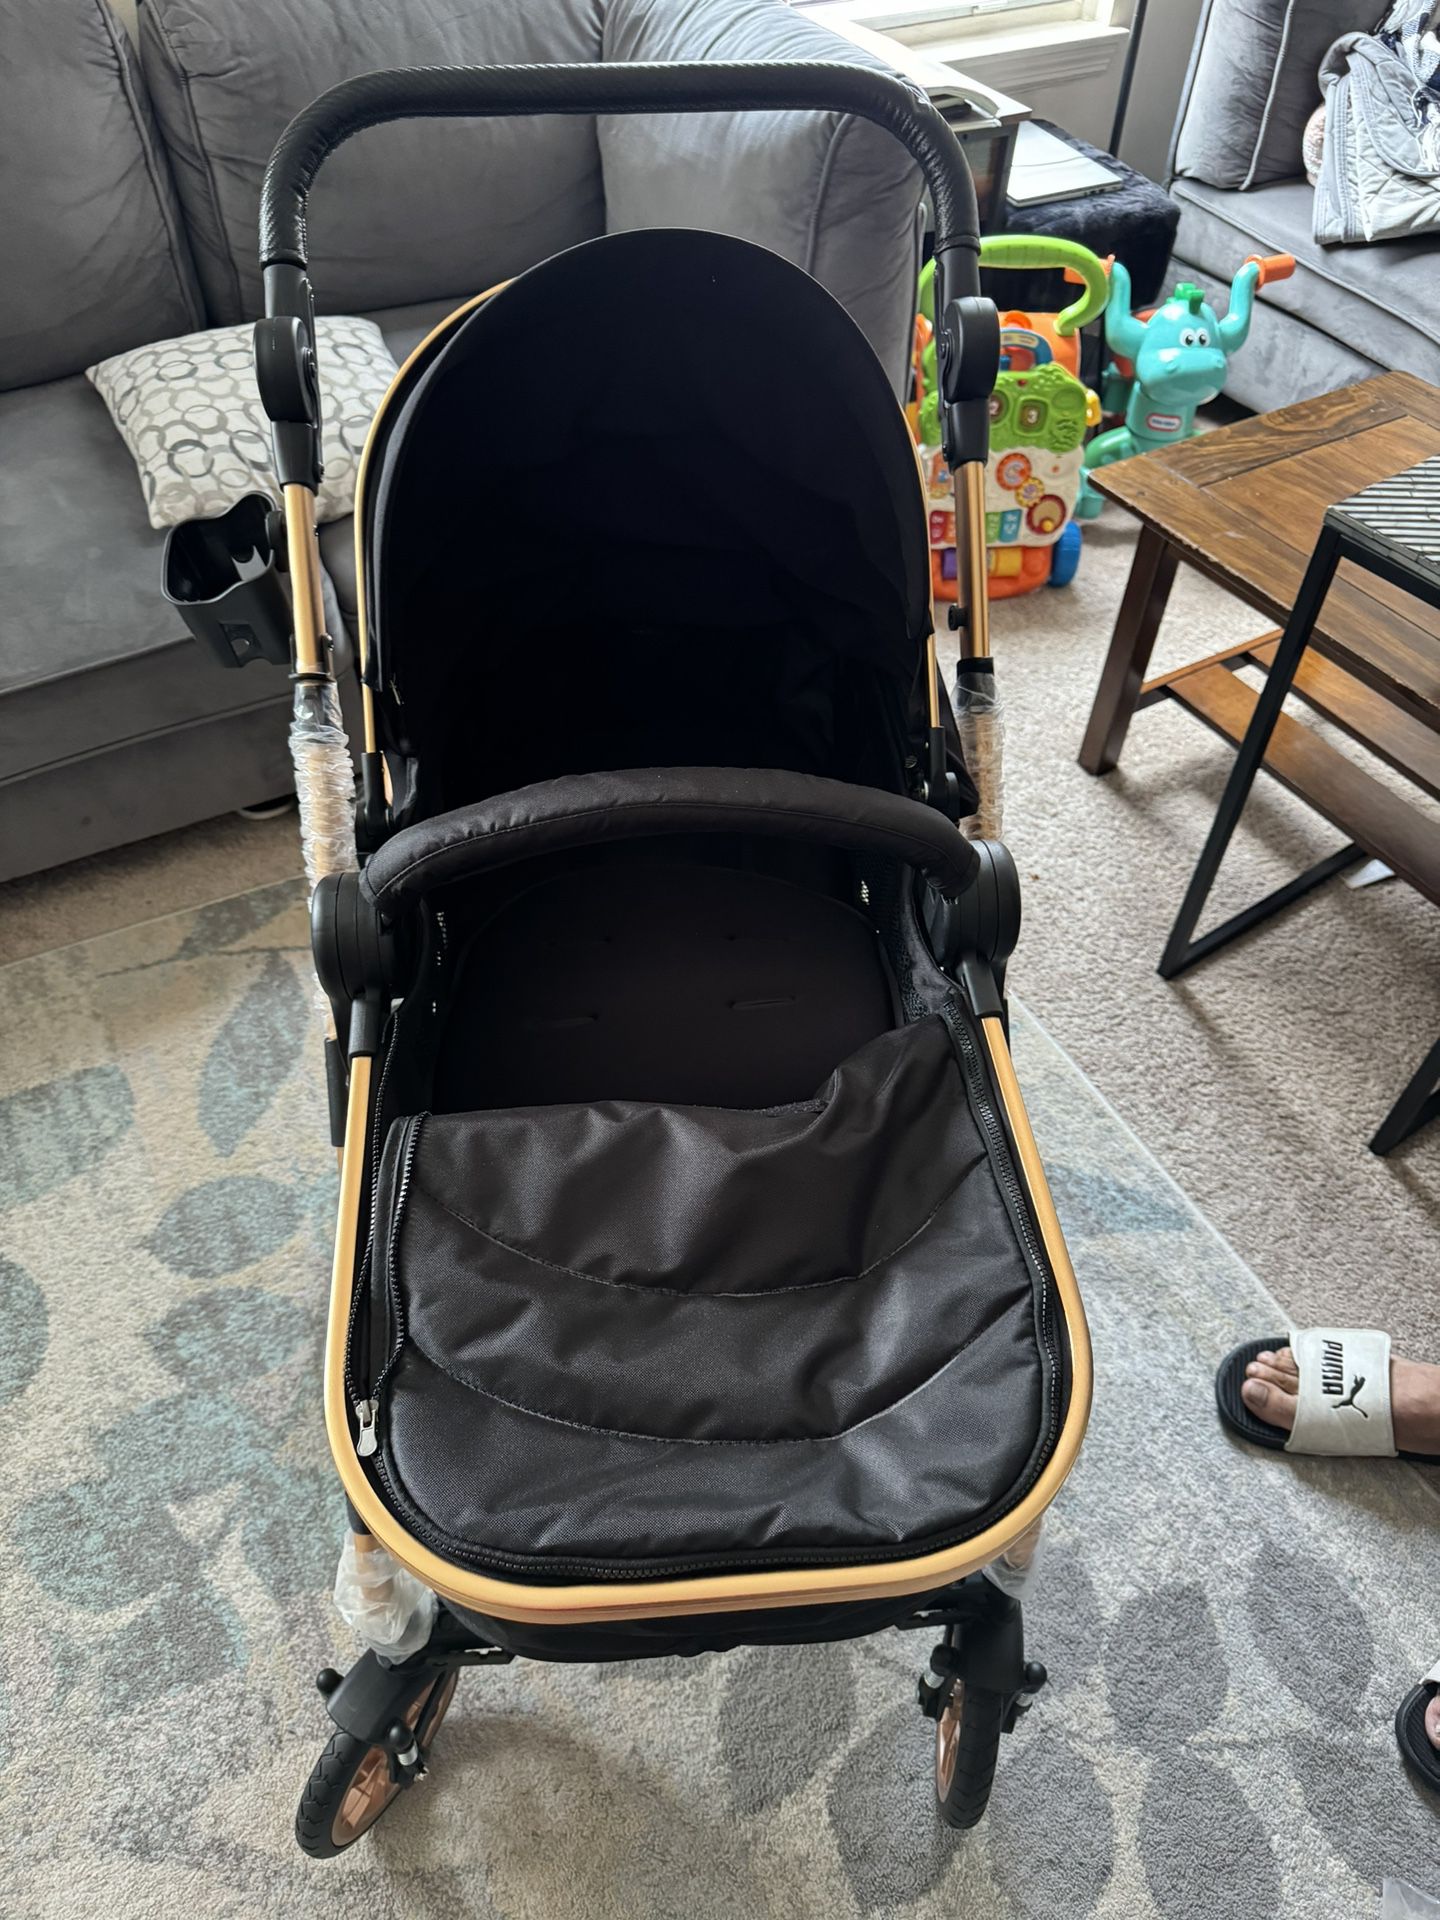 Baby Stroller Newborn And Up With Bassinet Mode